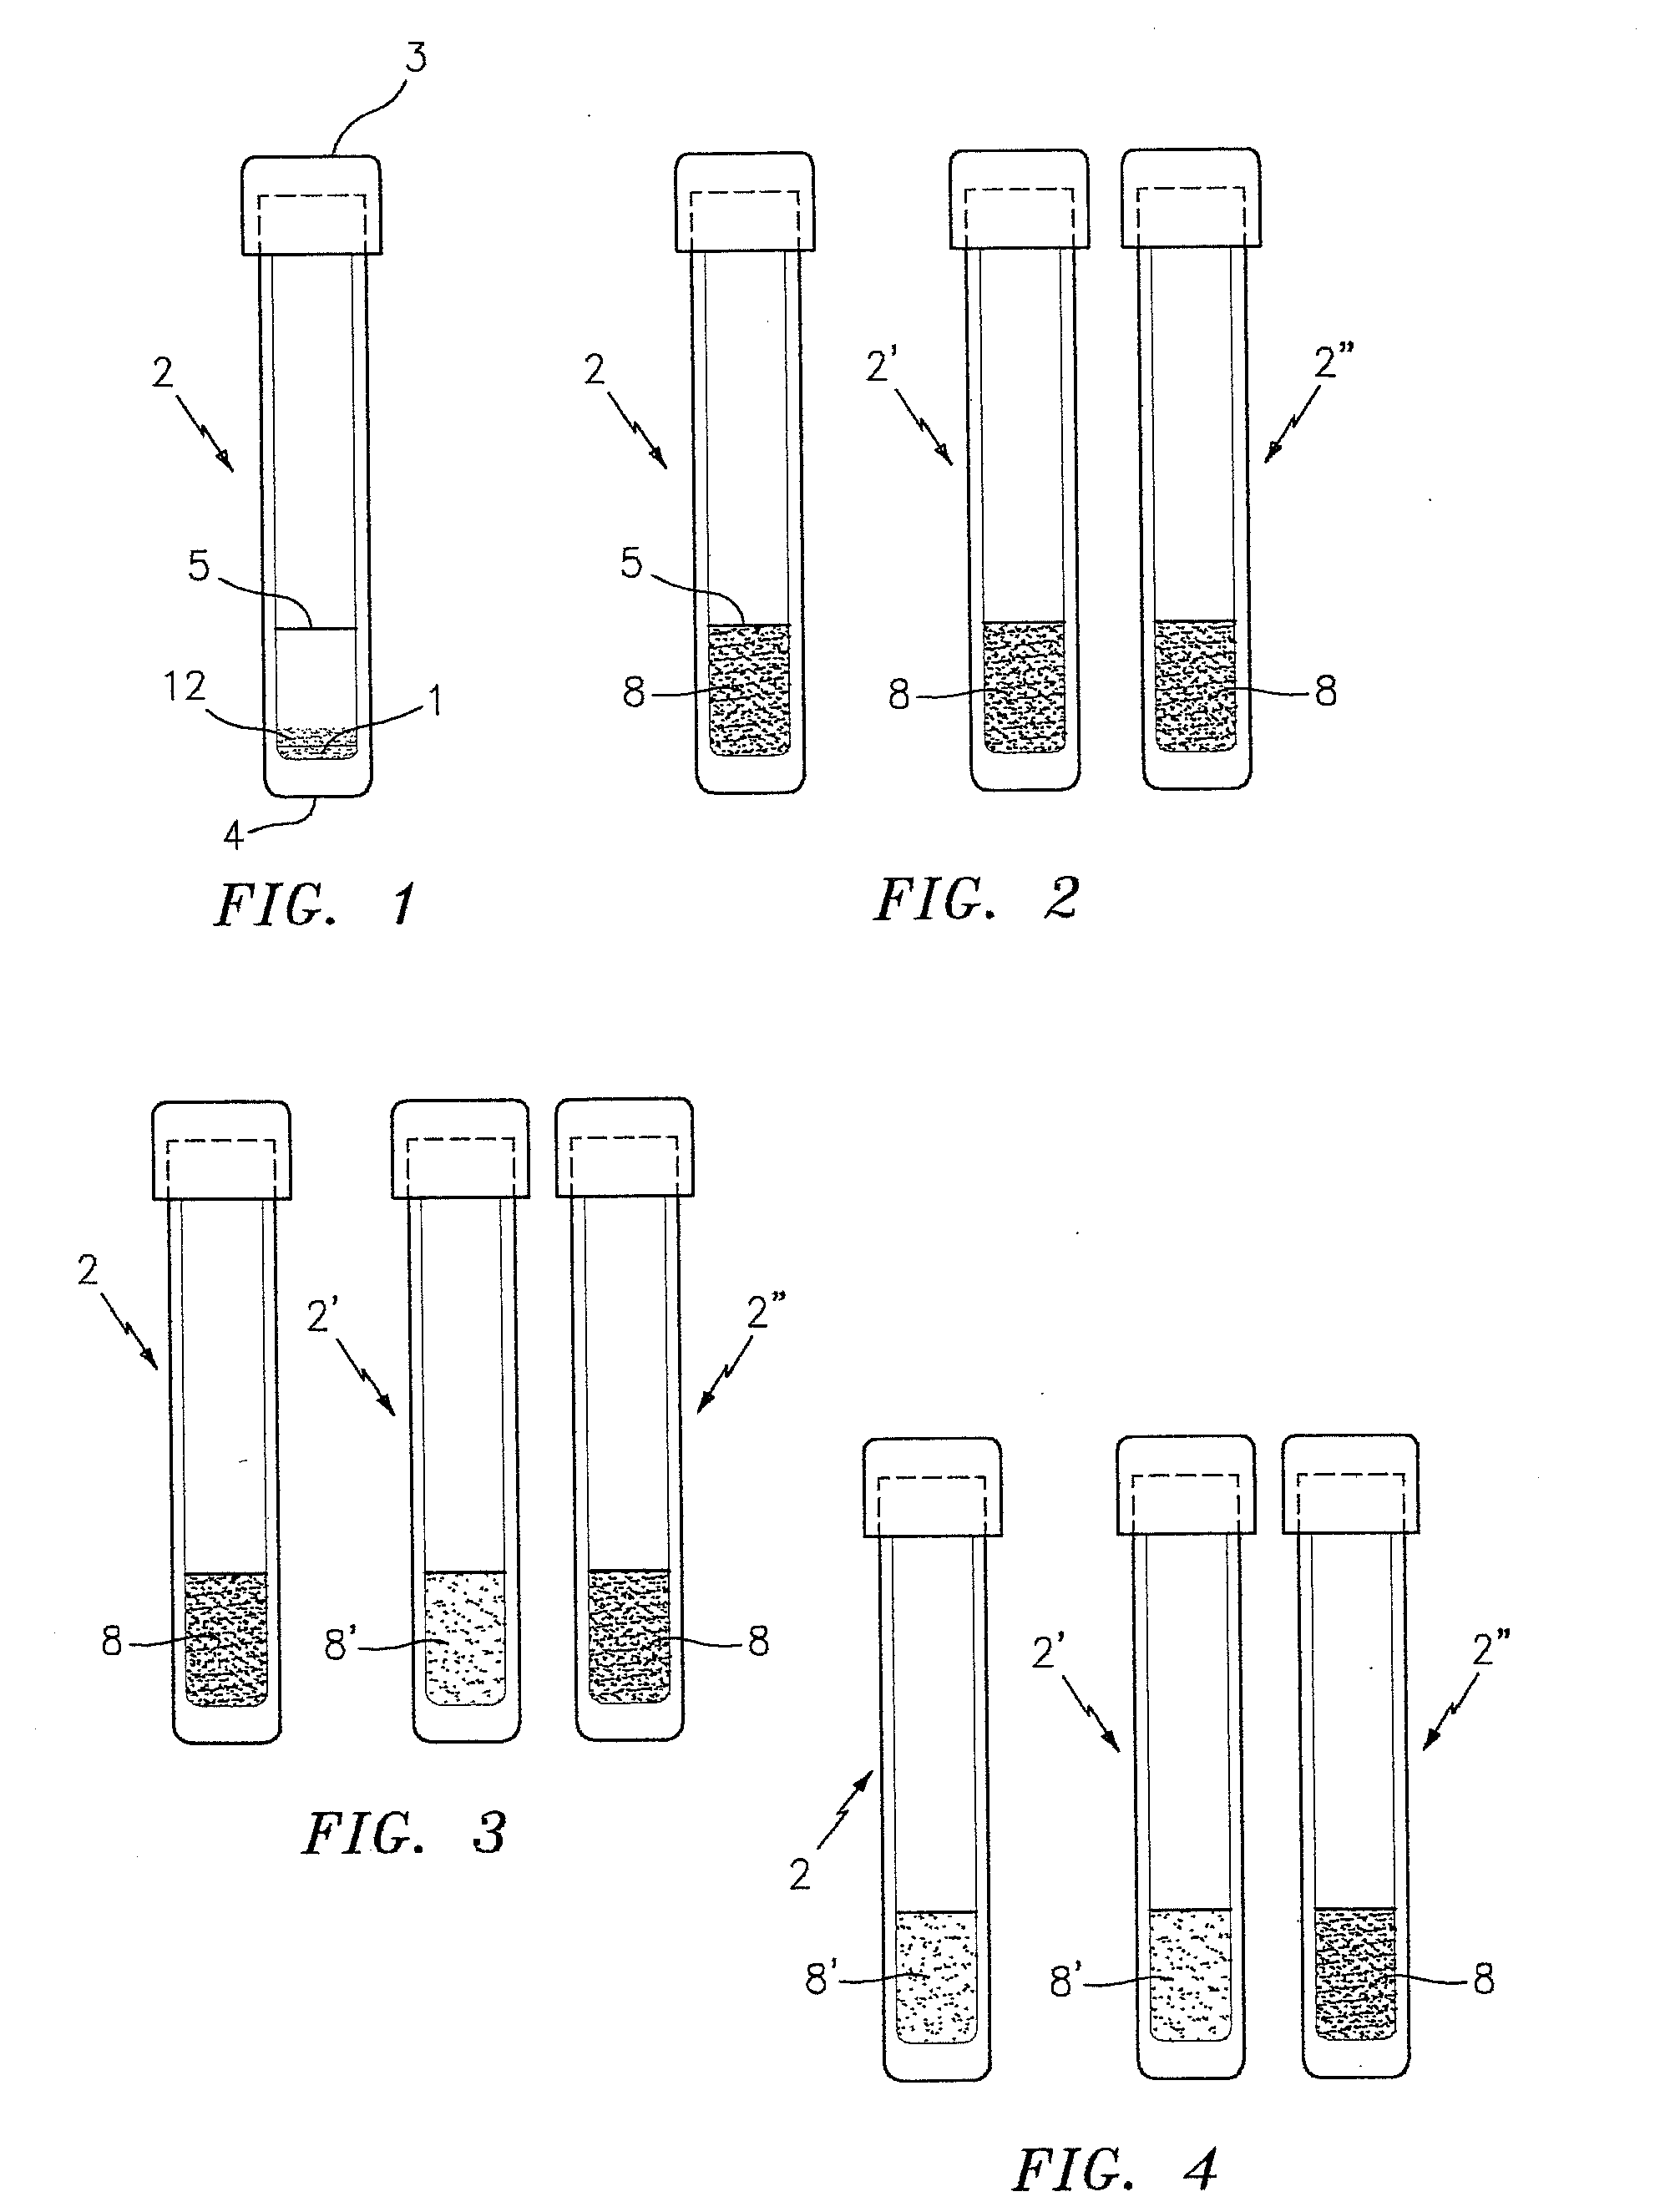 Method and medium for detecting the presence or absence of an antibiotic resistant pathogenic staphylococci in a test sample